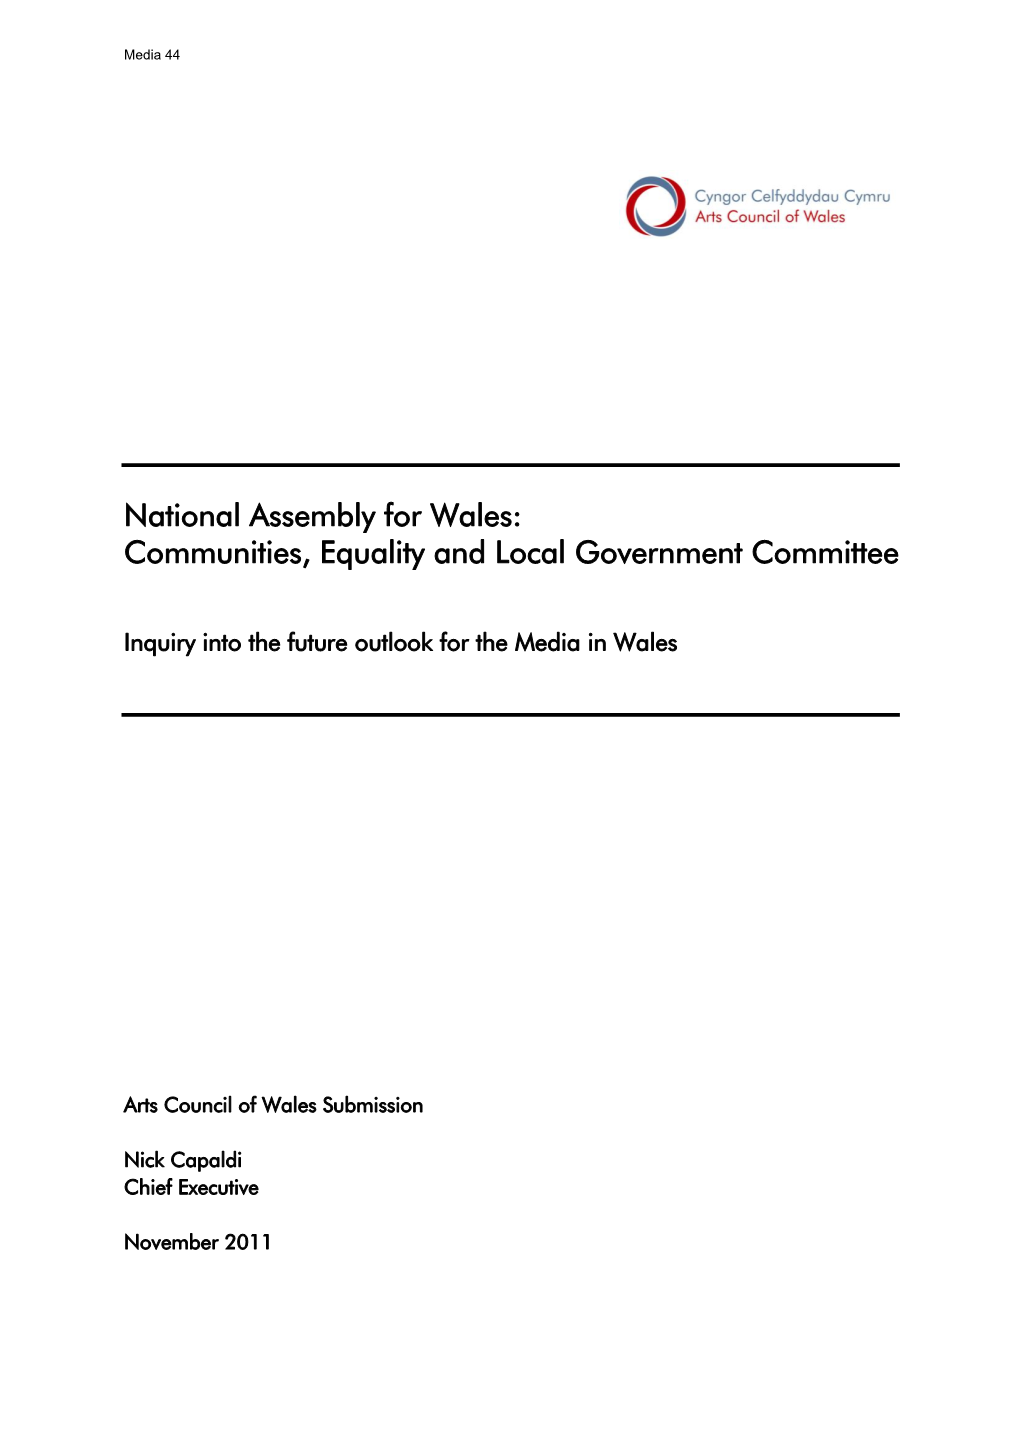 National Assembly for Wales: Communities, Equality and Local Government Committee